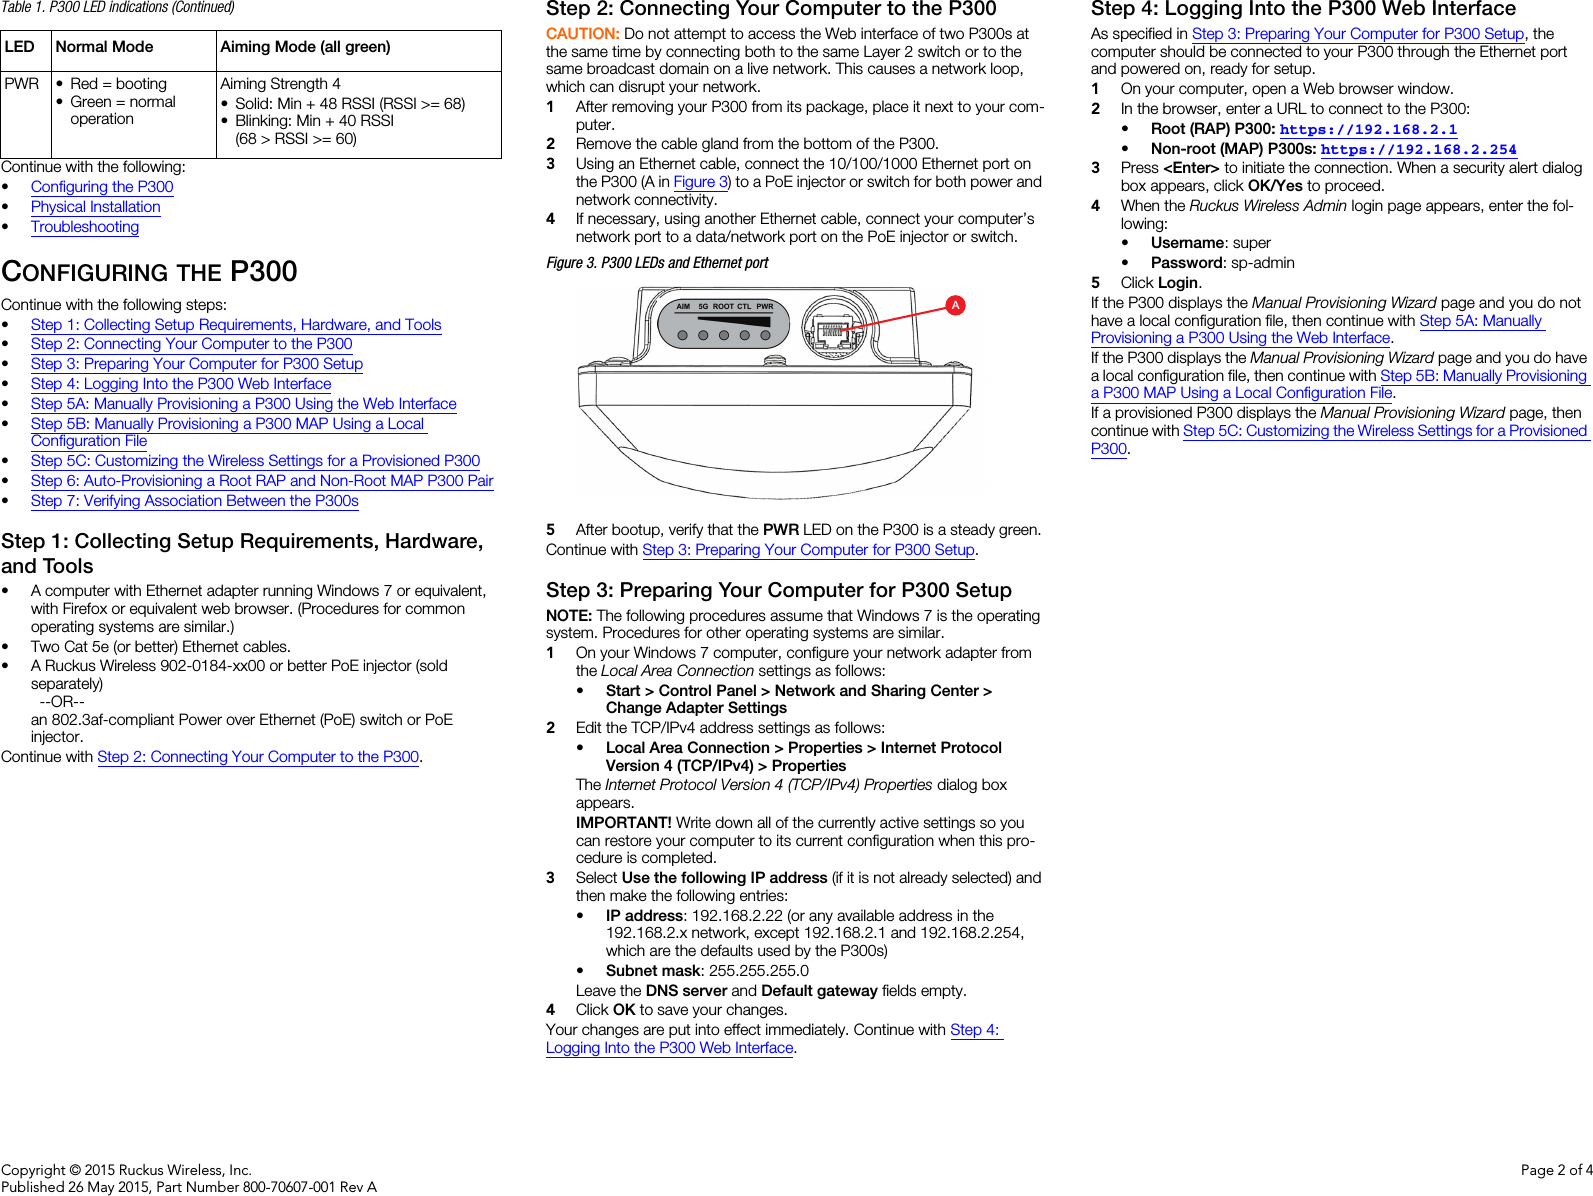 Copyright © 2015 Ruckus Wireless, Inc.Published 26 May 2015, Part Number 800-70607-001 Rev APage 2 of 4Continue with the following:•Configuring the P300•Physical Installation•TroubleshootingCONFIGURING THE P300Continue with the following steps:•Step 1: Collecting Setup Requirements, Hardware, and Tools•Step 2: Connecting Your Computer to the P300•Step 3: Preparing Your Computer for P300 Setup•Step 4: Logging Into the P300 Web Interface•Step 5A: Manually Provisioning a P300 Using the Web Interface•Step 5B: Manually Provisioning a P300 MAP Using a Local Configuration File•Step 5C: Customizing the Wireless Settings for a Provisioned P300•Step 6: Auto-Provisioning a Root RAP and Non-Root MAP P300 Pair•Step 7: Verifying Association Between the P300sStep 1: Collecting Setup Requirements, Hardware, and Tools • A computer with Ethernet adapter running Windows 7 or equivalent, with Firefox or equivalent web browser. (Procedures for common operating systems are similar.)• Two Cat 5e (or better) Ethernet cables.• A Ruckus Wireless 902-0184-xx00 or better PoE injector (sold separately) --OR--an 802.3af-compliant Power over Ethernet (PoE) switch or PoE injector.Continue with Step 2: Connecting Your Computer to the P300.Step 2: Connecting Your Computer to the P300CAUTION: Do not attempt to access the Web interface of two P300s at the same time by connecting both to the same Layer 2 switch or to the same broadcast domain on a live network. This causes a network loop, which can disrupt your network. 1After removing your P300 from its package, place it next to your com-puter.2Remove the cable gland from the bottom of the P300.3Using an Ethernet cable, connect the 10/100/1000 Ethernet port on the P300 (A in Figure 3) to a PoE injector or switch for both power and network connectivity.4If necessary, using another Ethernet cable, connect your computer’s network port to a data/network port on the PoE injector or switch. Figure 3. P300 LEDs and Ethernet port5After bootup, verify that the PWR LED on the P300 is a steady green.Continue with Step 3: Preparing Your Computer for P300 Setup.Step 3: Preparing Your Computer for P300 SetupNOTE: The following procedures assume that Windows 7 is the operating system. Procedures for other operating systems are similar.1On your Windows 7 computer, configure your network adapter from the Local Area Connection settings as follows:•Start &gt; Control Panel &gt; Network and Sharing Center &gt; Change Adapter Settings2Edit the TCP/IPv4 address settings as follows: •Local Area Connection &gt; Properties &gt; Internet Protocol Version 4 (TCP/IPv4) &gt; PropertiesThe Internet Protocol Version 4 (TCP/IPv4) Properties dialog box appears.IMPORTANT! Write down all of the currently active settings so you can restore your computer to its current configuration when this pro-cedure is completed.3Select Use the following IP address (if it is not already selected) and then make the following entries:•IP address: 192.168.2.22 (or any available address in the 192.168.2.x network, except 192.168.2.1 and 192.168.2.254, which are the defaults used by the P300s)•Subnet mask: 255.255.255.0Leave the DNS server and Default gateway fields empty.4Click OK to save your changes.Your changes are put into effect immediately. Continue with Step 4: Logging Into the P300 Web Interface.Step 4: Logging Into the P300 Web InterfaceAs specified in Step 3: Preparing Your Computer for P300 Setup, the computer should be connected to your P300 through the Ethernet port and powered on, ready for setup.1On your computer, open a Web browser window.2In the browser, enter a URL to connect to the P300: •Root (RAP) P300: https://192.168.2.1 •Non-root (MAP) P300s: https://192.168.2.2543Press &lt;Enter&gt; to initiate the connection. When a security alert dialog box appears, click OK/Yes to proceed.4When the Ruckus Wireless Admin login page appears, enter the fol-lowing: •Username: super•Password: sp-admin5Click Login.If the P300 displays the Manual Provisioning Wizard page and you do not have a local configuration file, then continue with Step 5A: Manually Provisioning a P300 Using the Web Interface. If the P300 displays the Manual Provisioning Wizard page and you do have a local configuration file, then continue with Step 5B: Manually Provisioning a P300 MAP Using a Local Configuration File. If a provisioned P300 displays the Manual Provisioning Wizard page, then continue with Step 5C: Customizing the Wireless Settings for a Provisioned P300.PWR • Red = booting• Green = normal operationAiming Strength 4• Solid: Min + 48 RSSI (RSSI &gt;= 68)• Blinking: Min + 40 RSSI (68 &gt; RSSI &gt;= 60)Table 1. P300 LED indications (Continued)LED Normal Mode Aiming Mode (all green)A